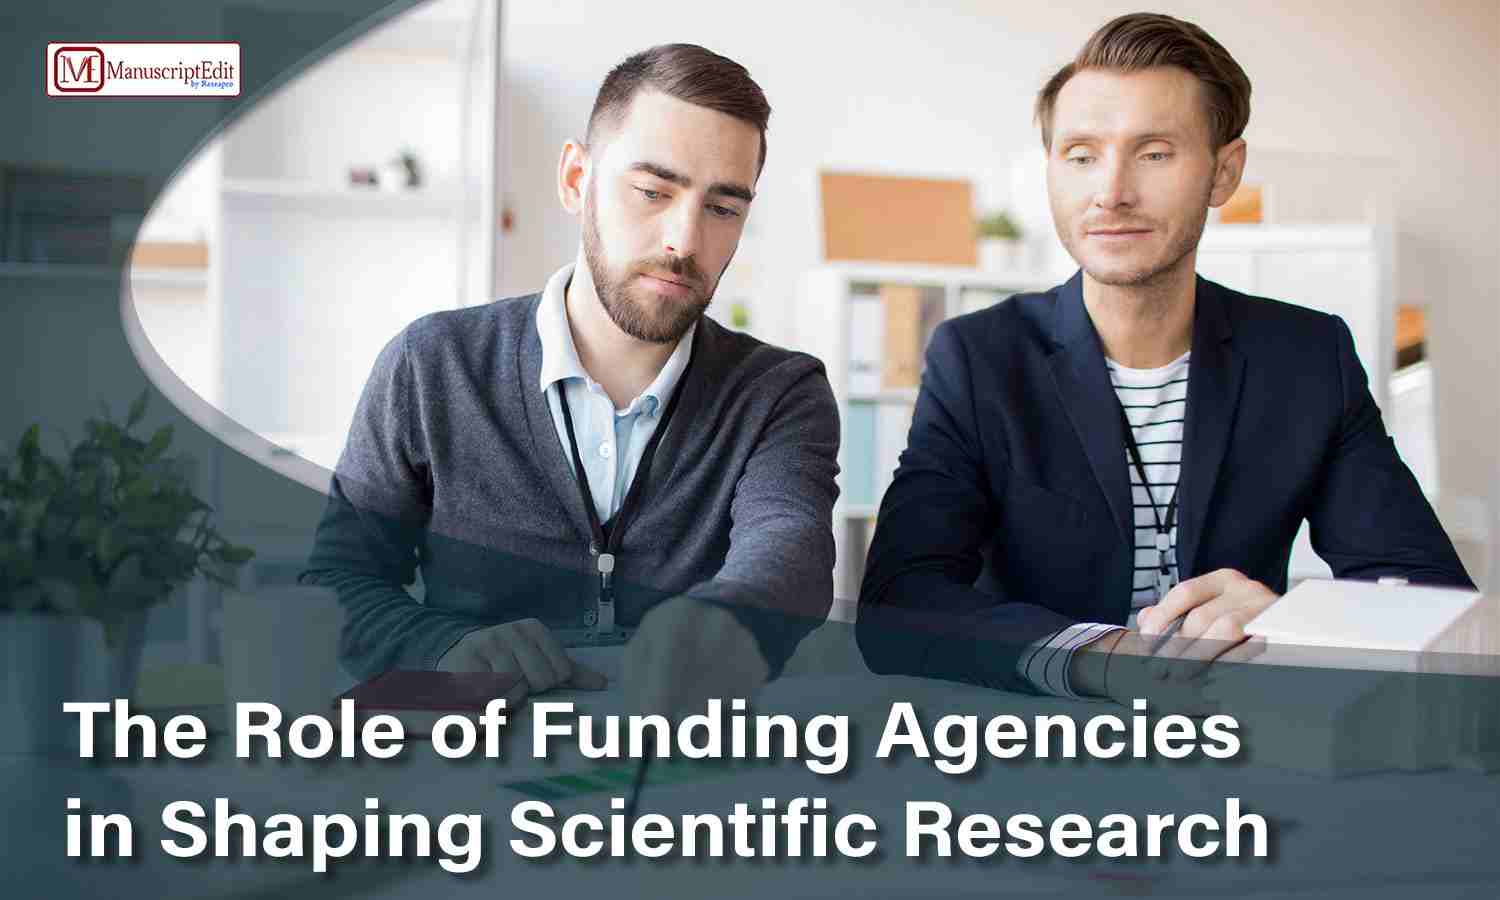 The Role of Funding Agencies in Shaping Scientific Research